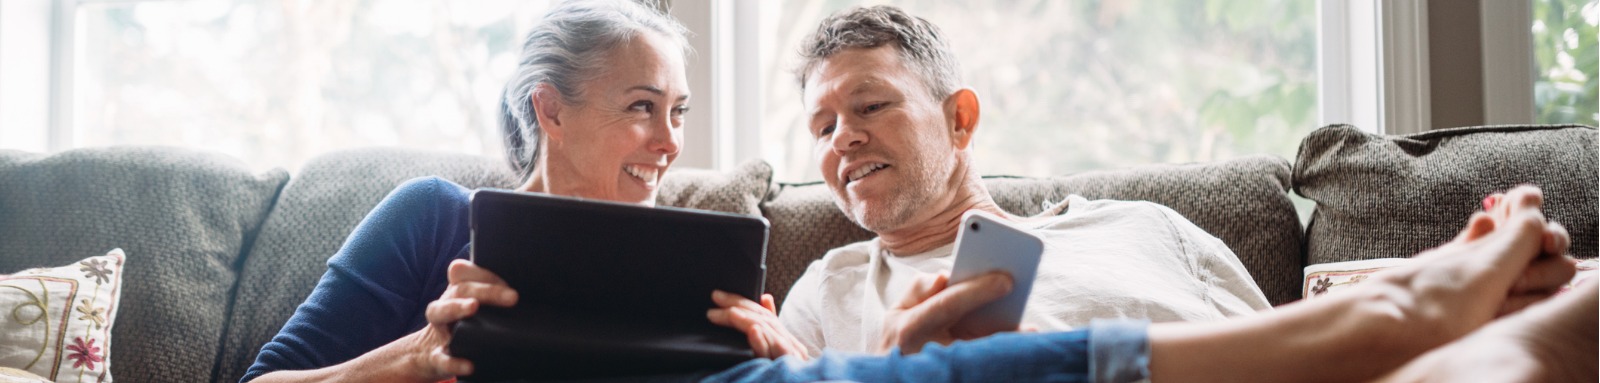 Woman and man on couch smilling and holding mobile devices